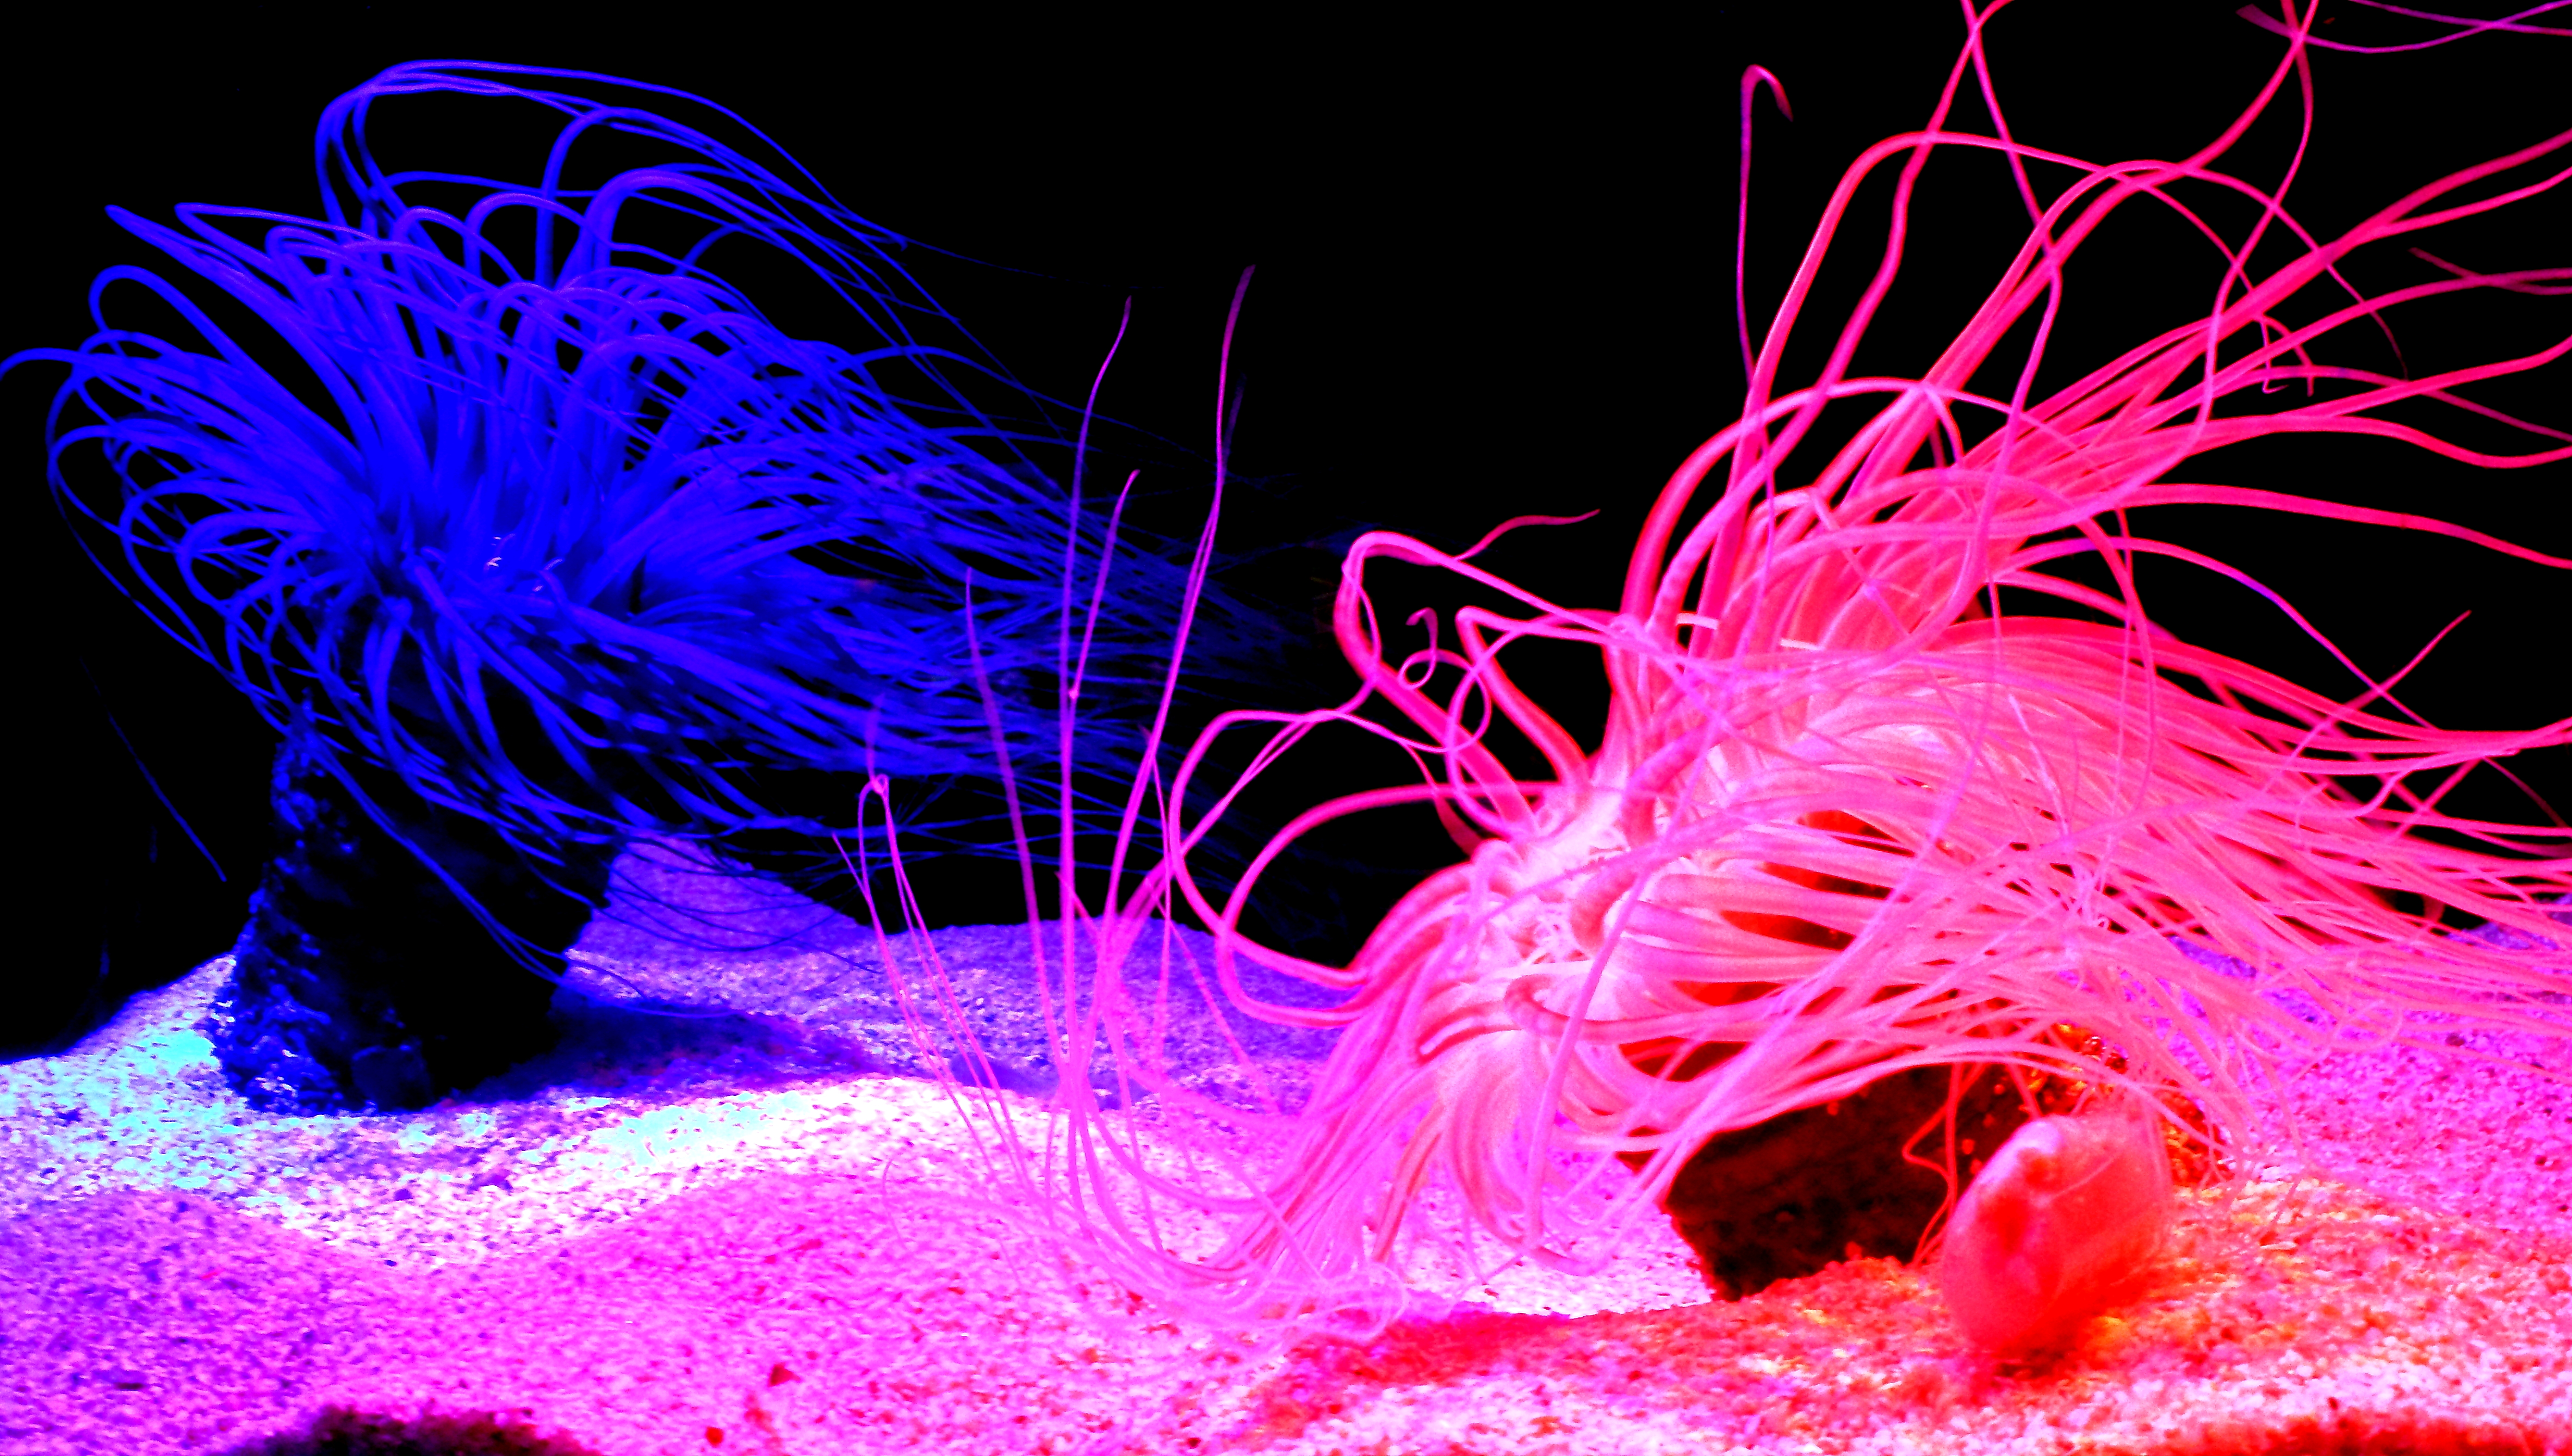 Jellyfish Wallpaper Cool Throw Colorful There Trippy HD